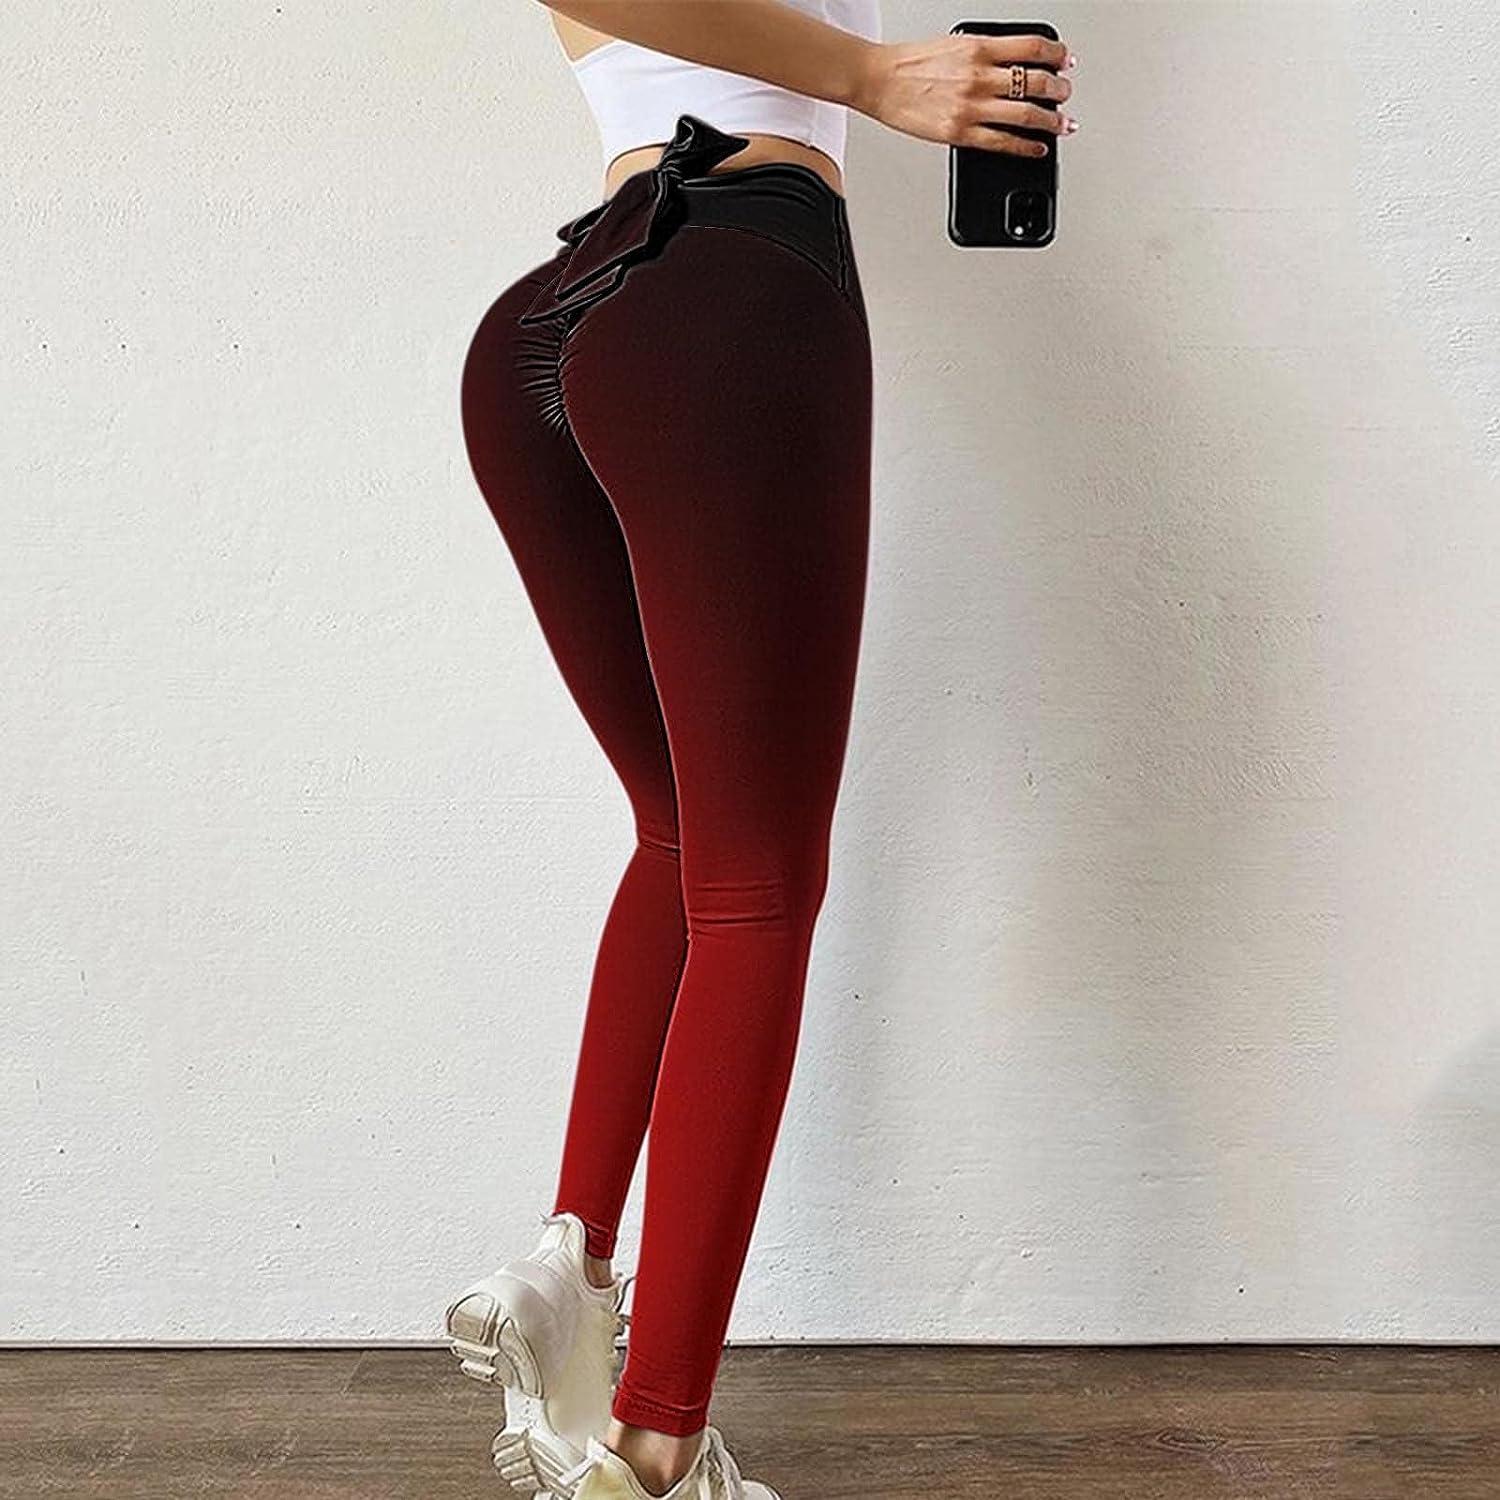 Buy SEASUM Women High Waisted Yoga Pants Workout Butt Lifting Scrunch Booty  Leggings Tummy Control Anti Cellulite Textured Tights XS at Amazon.in